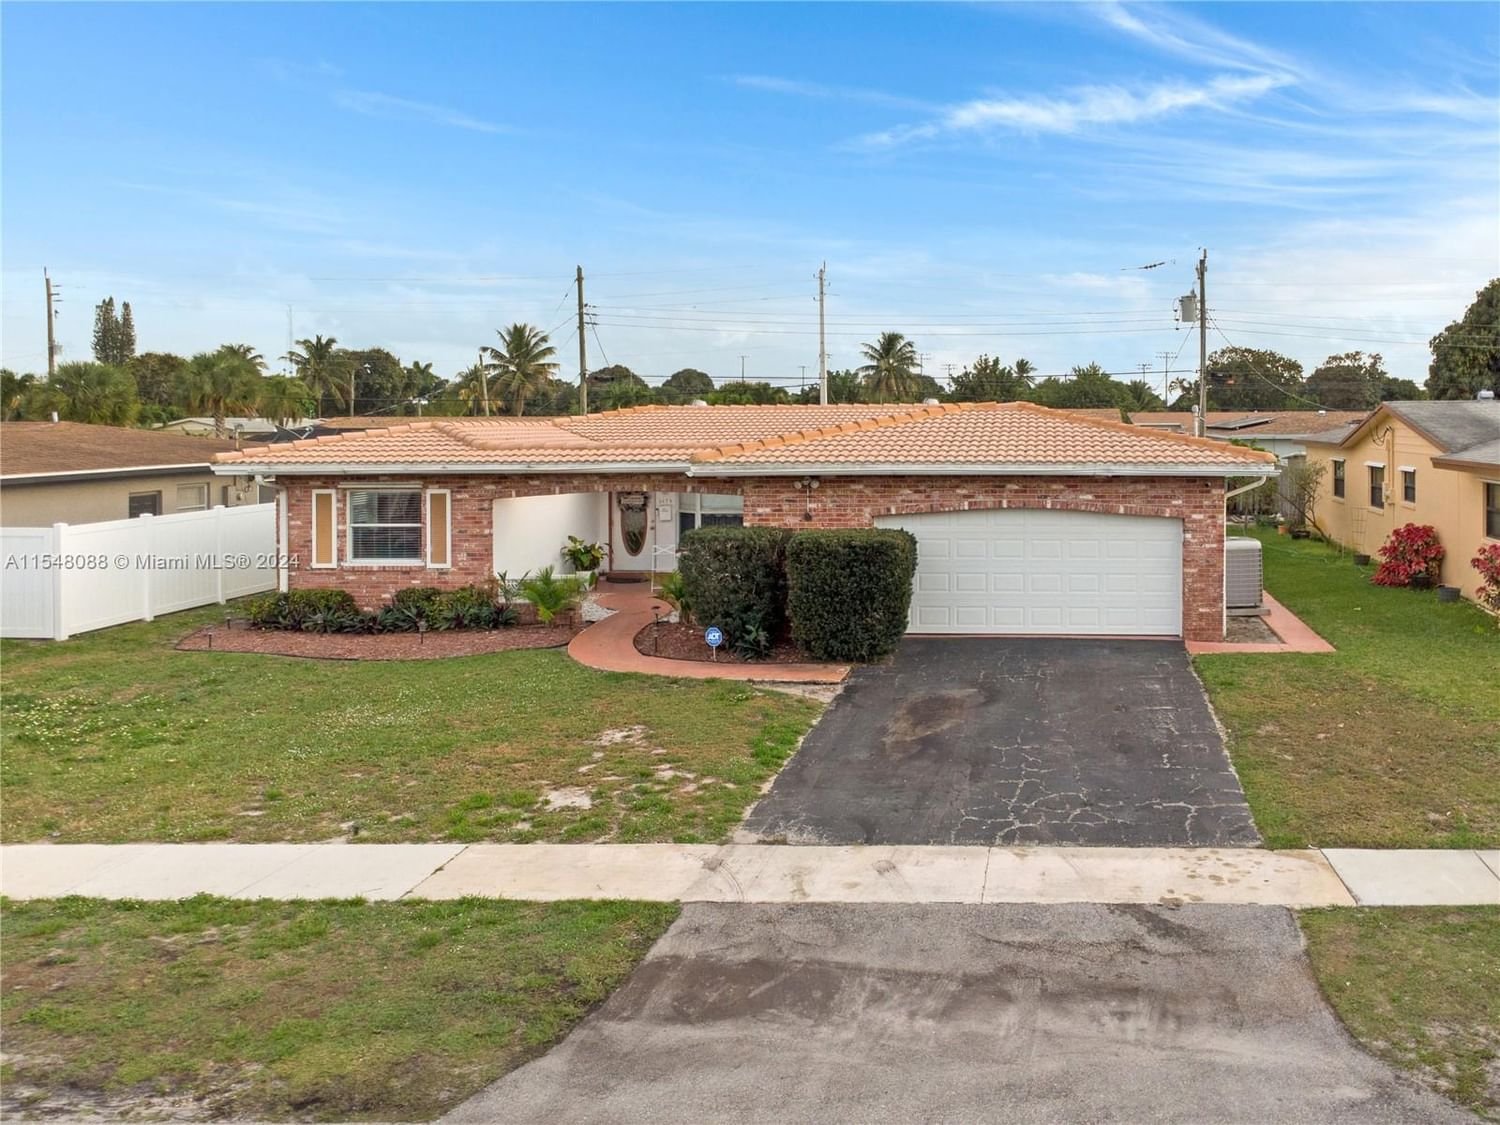 Real estate property located at 3478 25th St, Broward County, LAUDERDALE LAKES EAST GAT, Lauderdale Lakes, FL